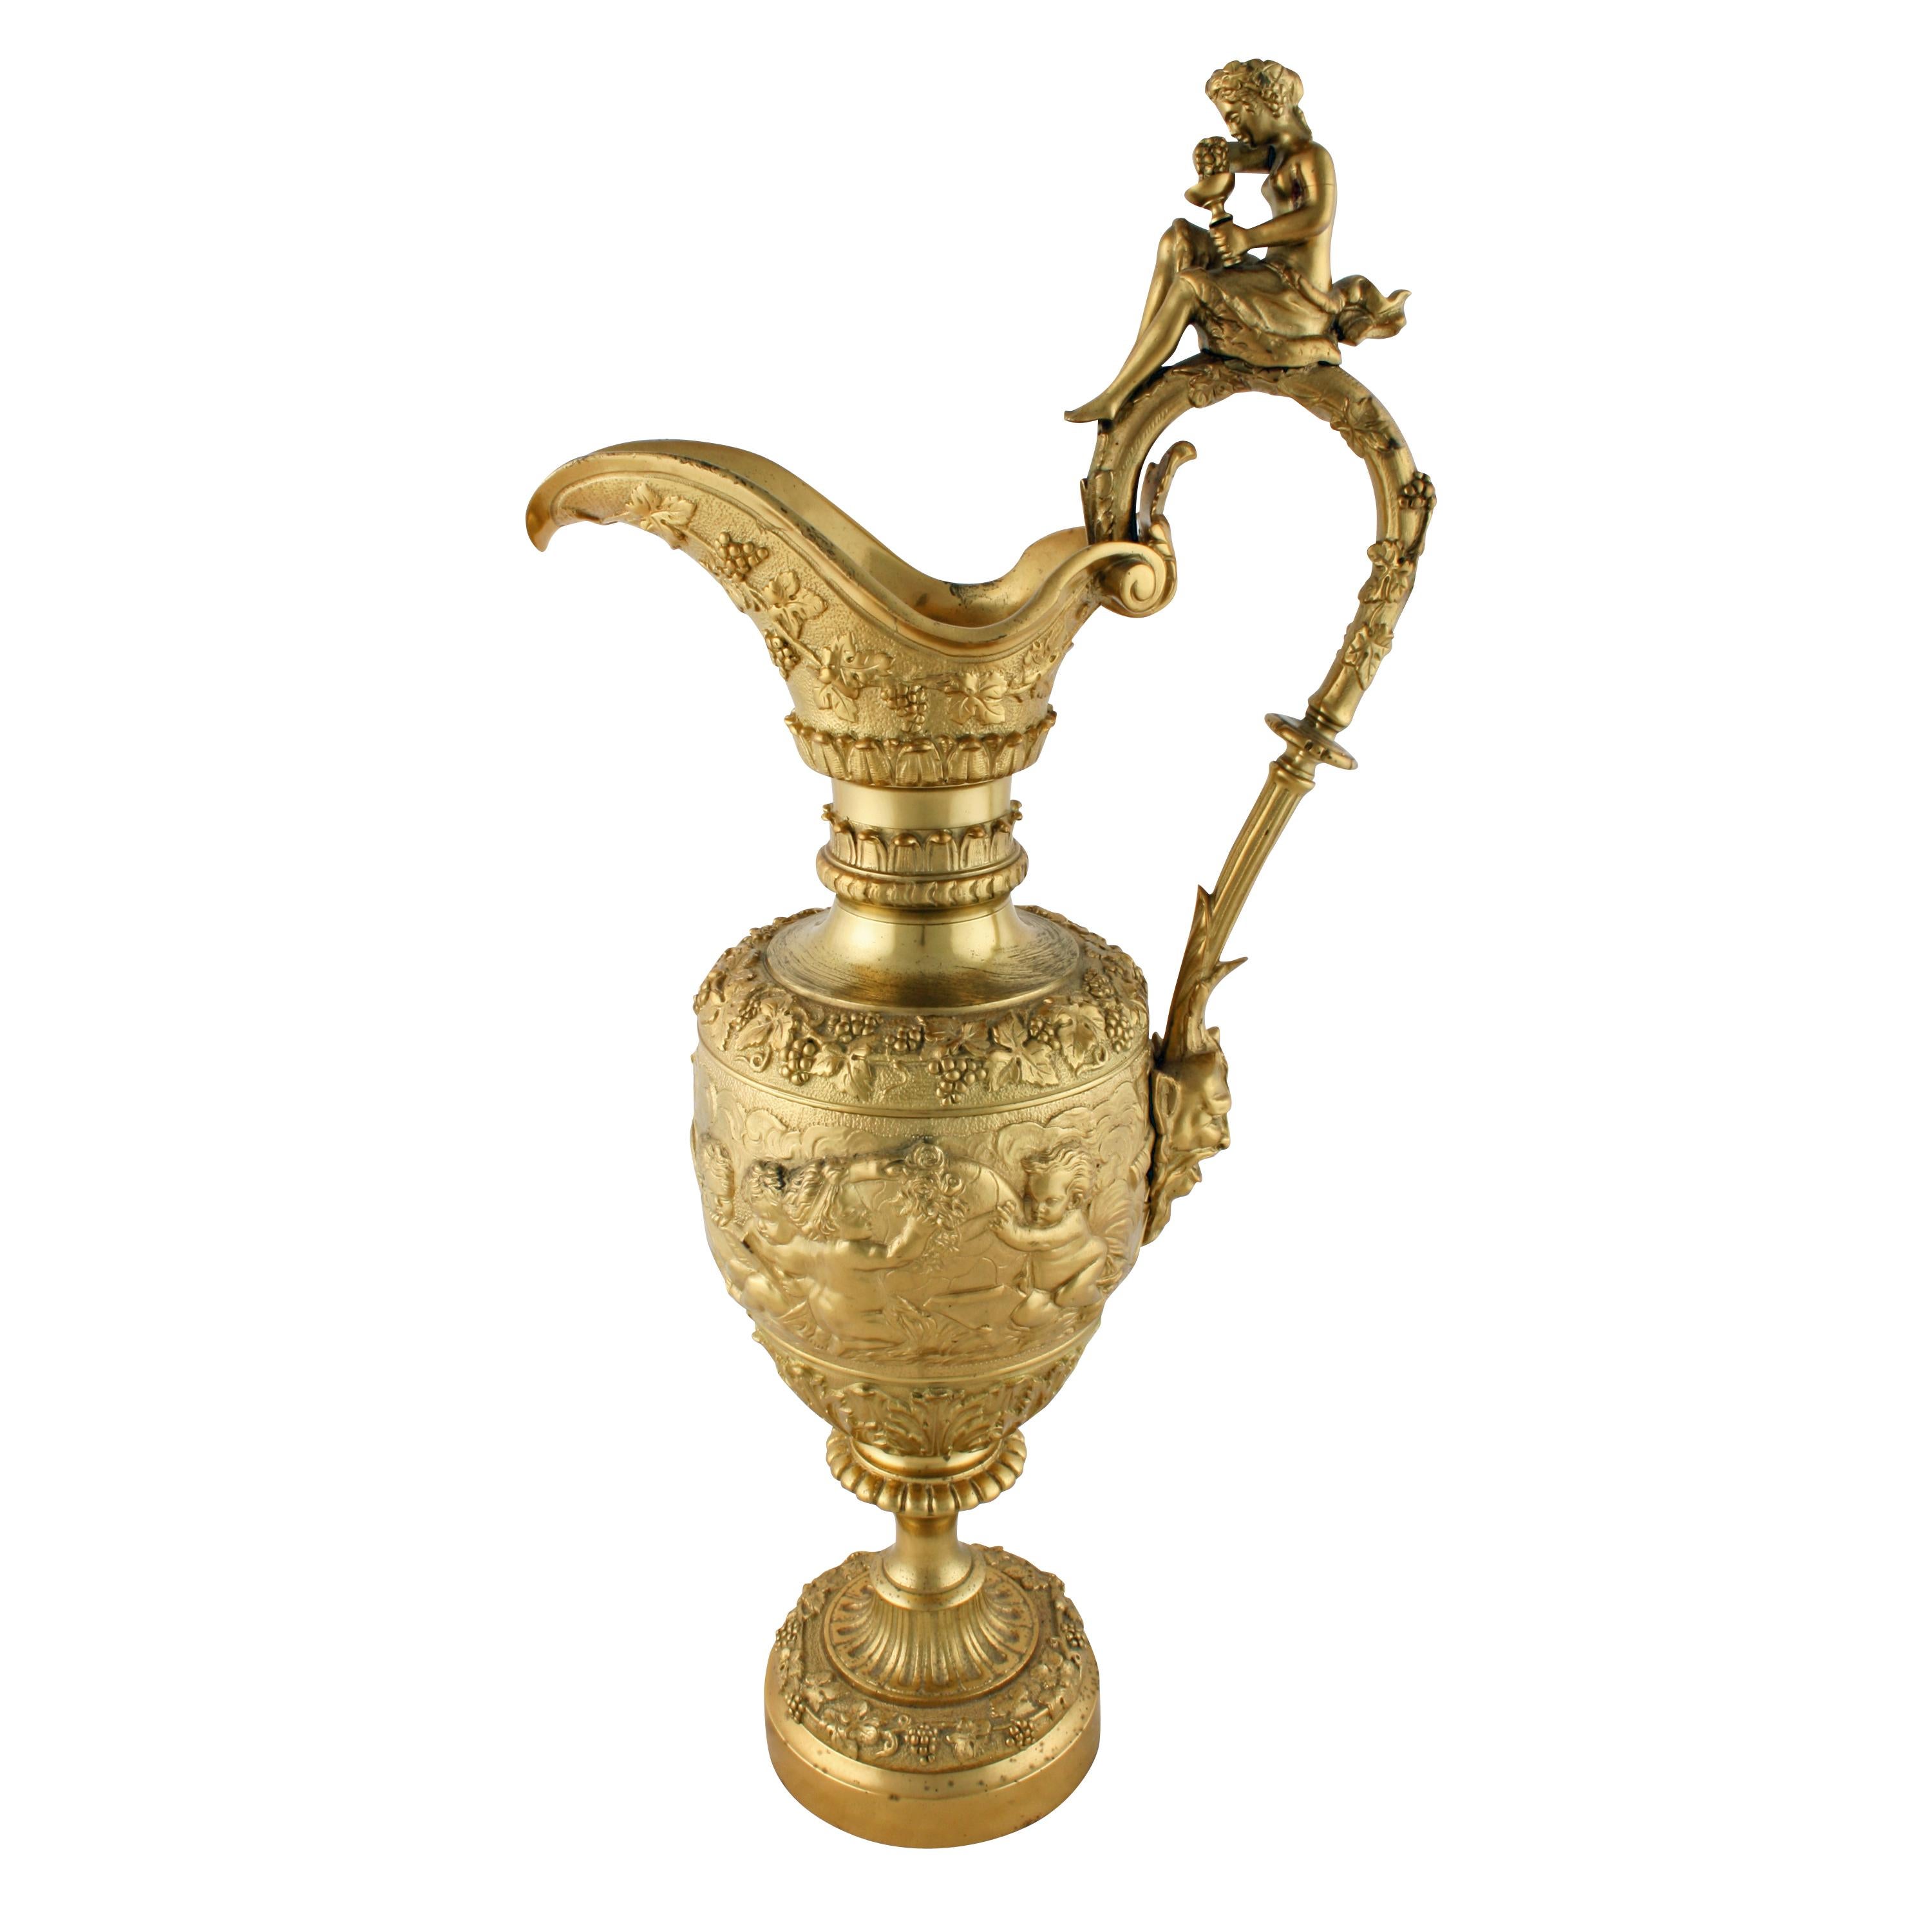 Large Decorative ormolu ewer

19th century large ormolu decorative ewer shaped ornament.


The Ewer is decorated with grapes and vines to the handle and the main body has cherubs at study.


The handle top is mounted with a female figure